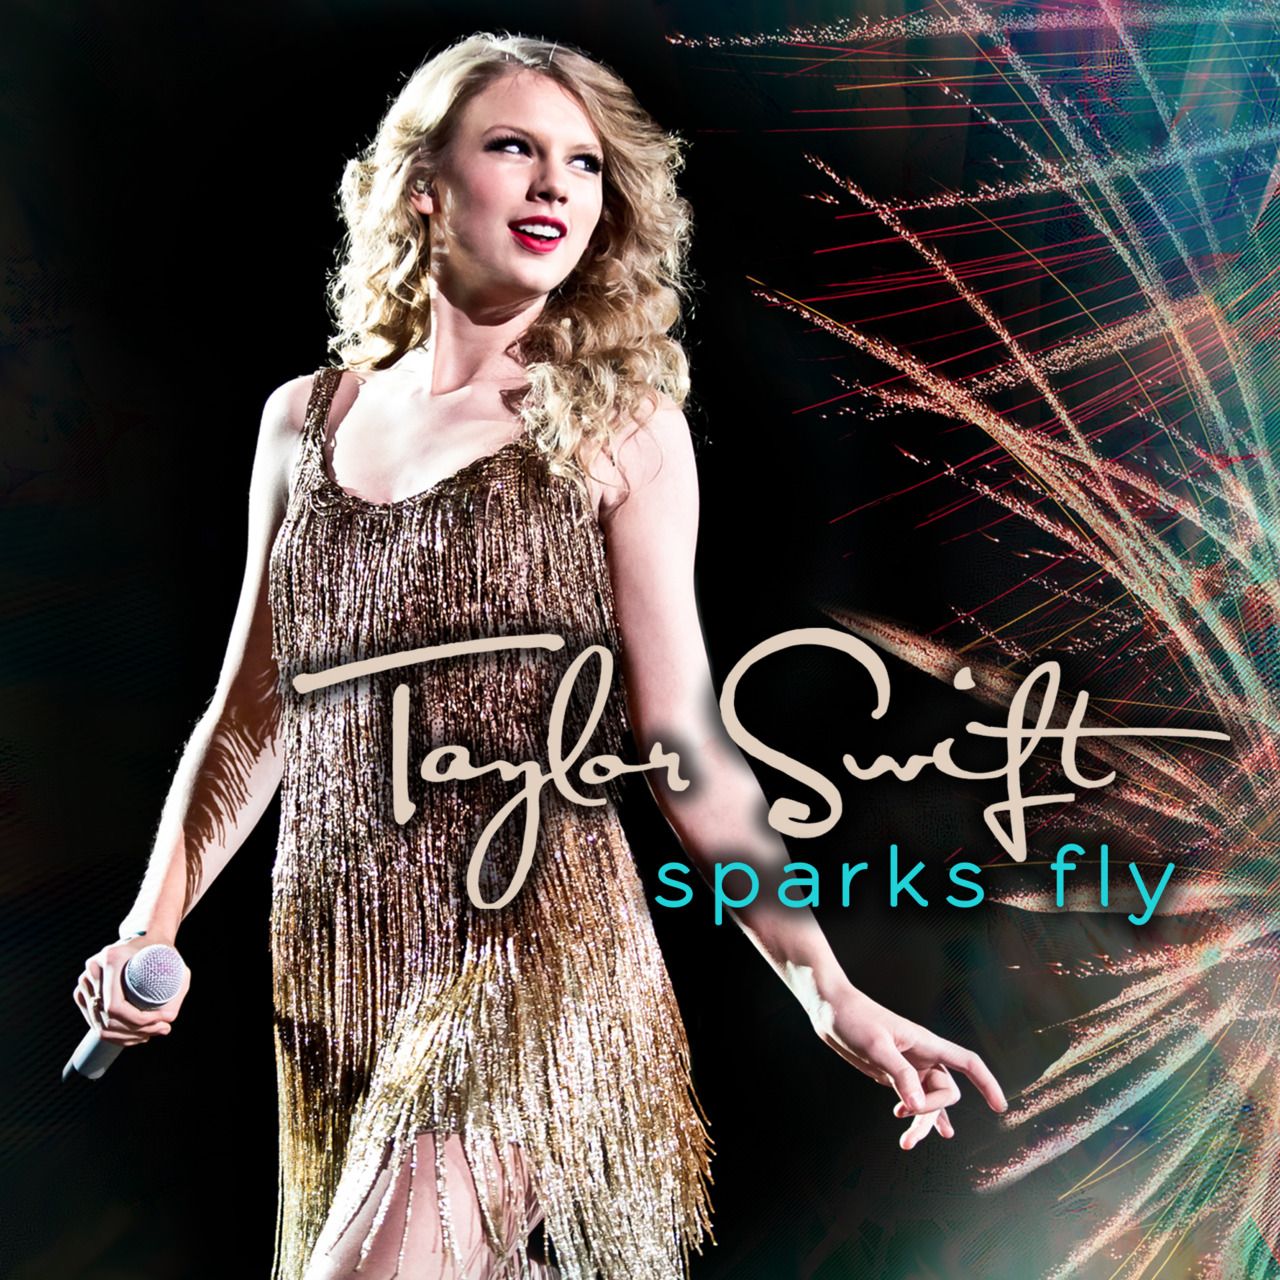 Sparks Fly [Official Single Cover] Swift Photo 23495654